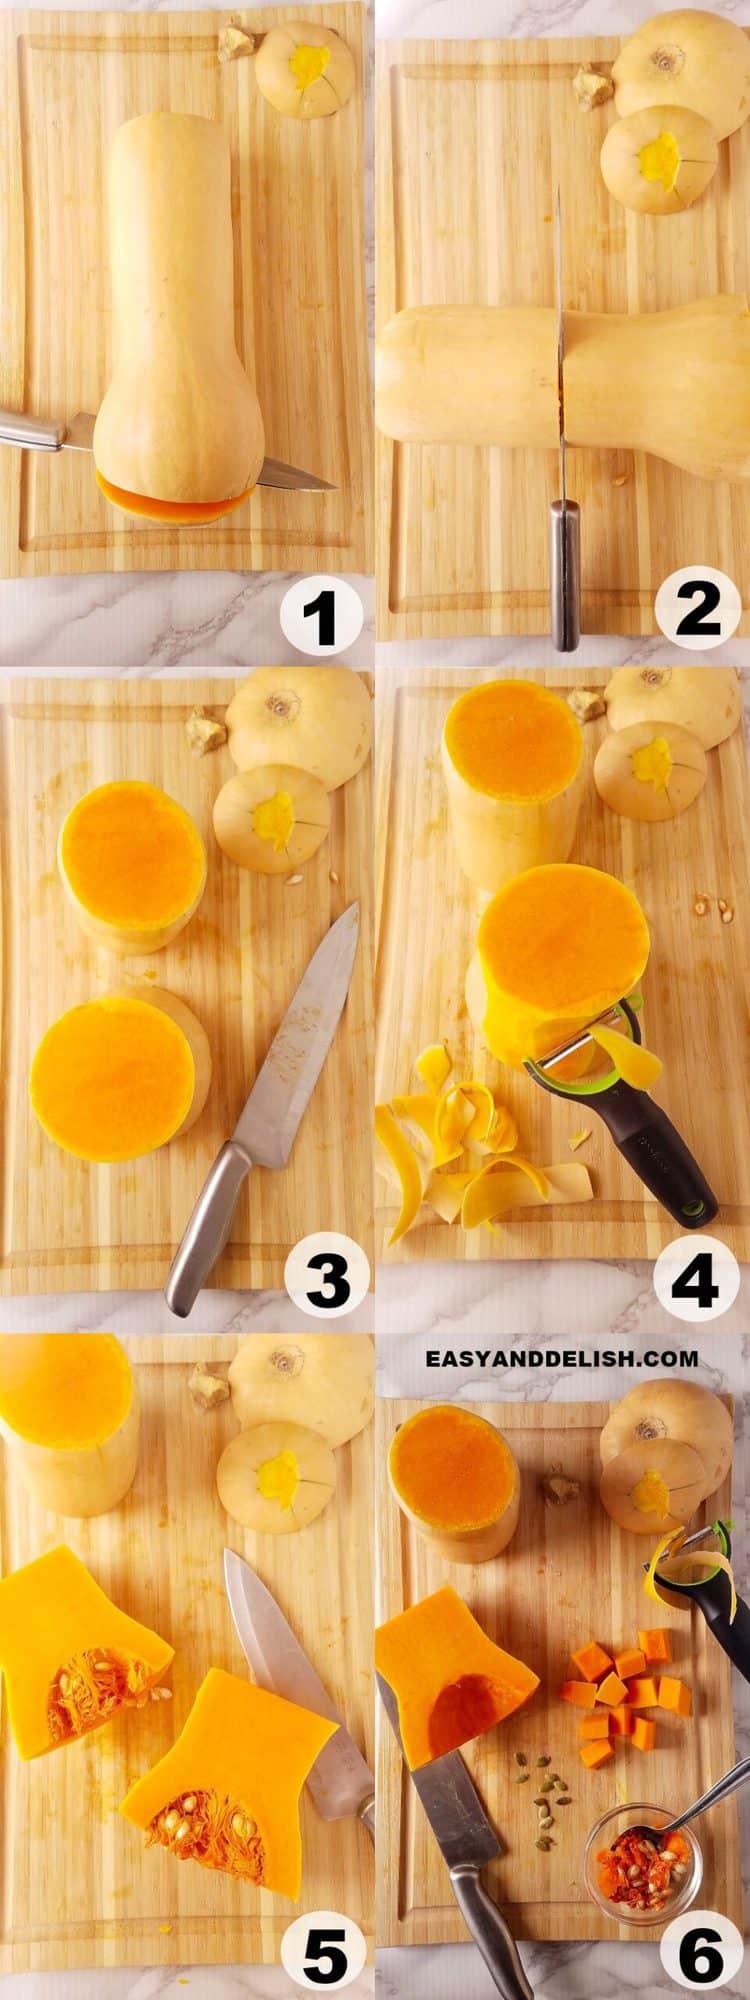 photo collage showing how to peel and cut vegetable in 6 steps